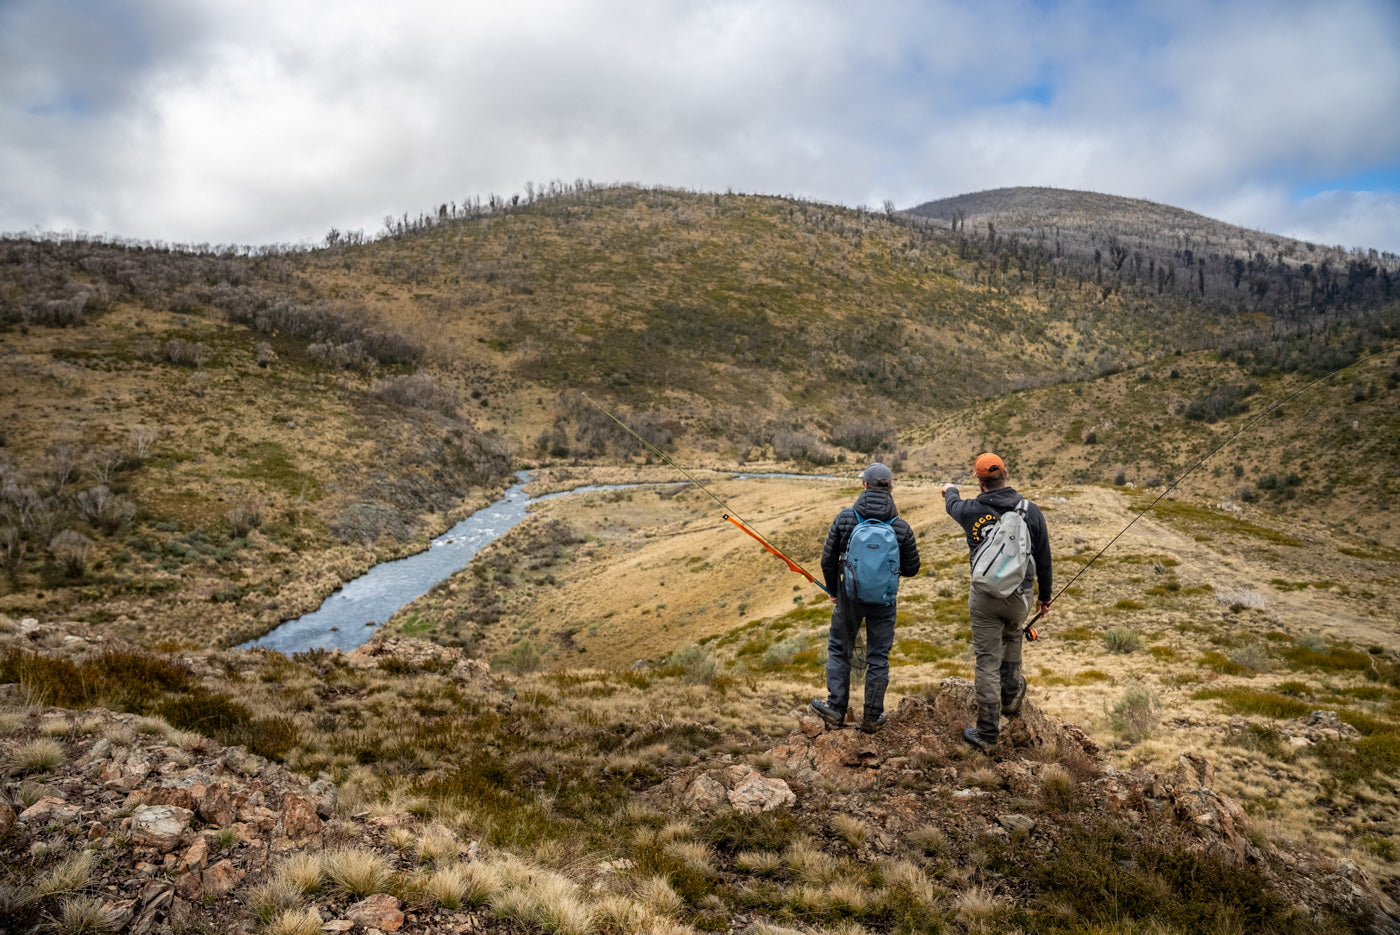 Guided fly fishing tours in Kosciuszko National Park with Tom's Outdoors Guide Services